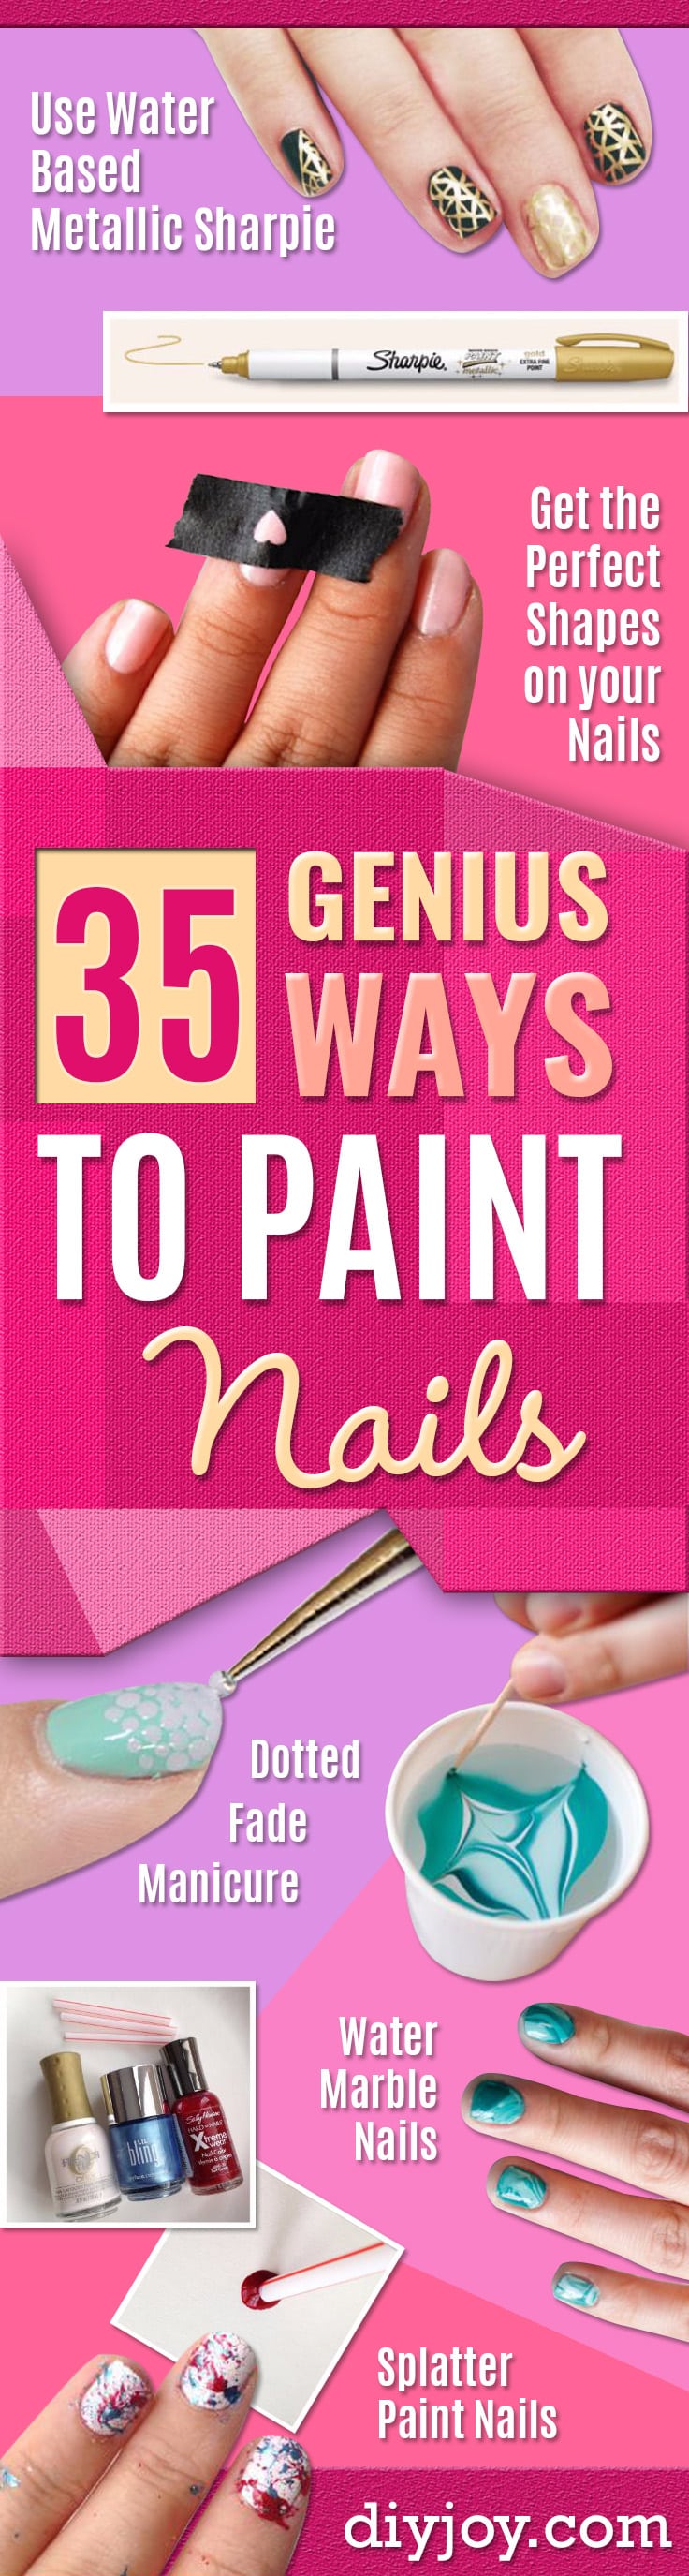 Easy Ways to Paint Nails - Quick Tips and Tricks for Manicures at Home - Nail Designs and Art Ideas for Simple DIY Pedicures and Manicure at Home - Hacks and Tutorials with Cool Step by Step Instructions and Tutorials - DIY Projects and Crafts by DIY JOY